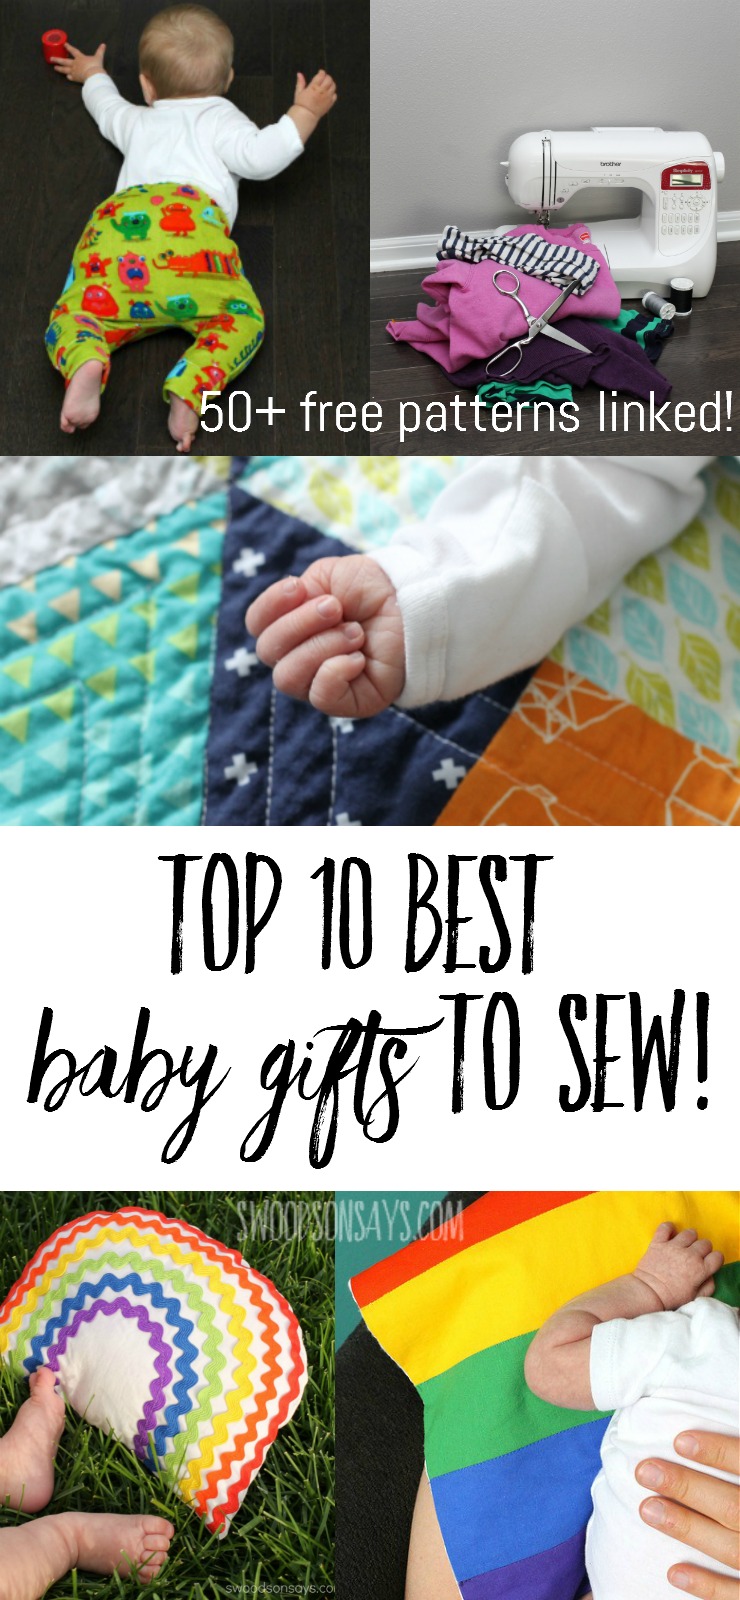 Top 10 best baby gifts to sew! There are 50+ links to free baby sewing patterns and tutorials for the best handmade baby gifts. Pair one with something practical that you loved as a parent for the best baby shower gift idea ever!